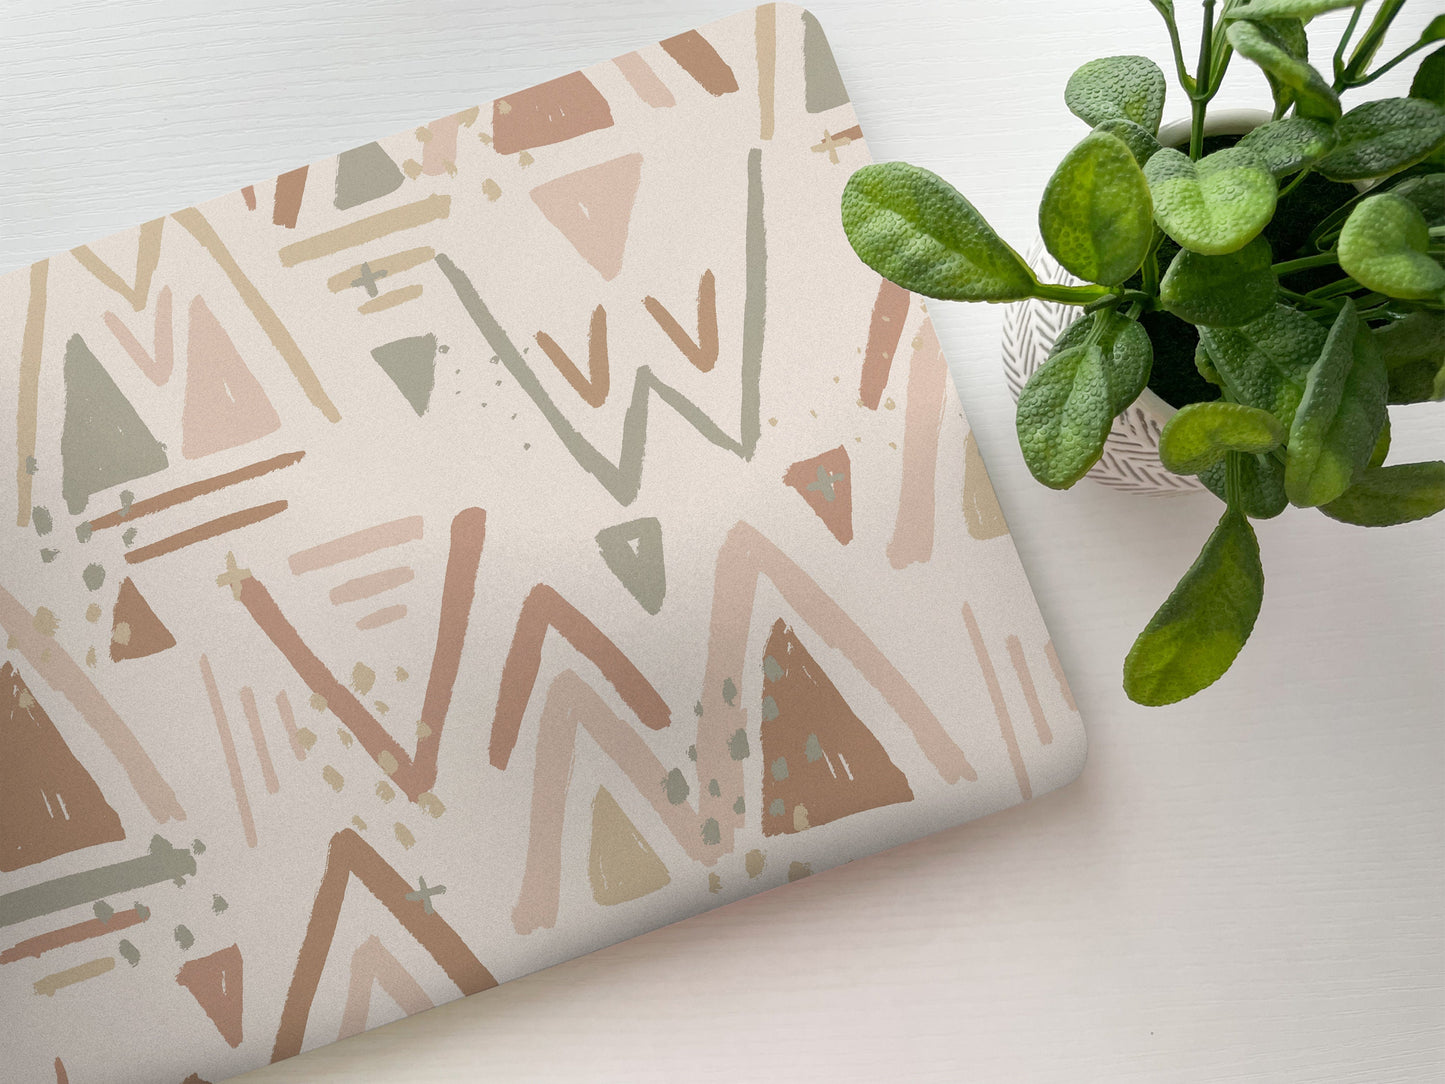 Muted Aztec Pattern Laptop Skin, Laptop Cover, Laptop Skins, Removable Laptop Skins, Laptop Decal, Customized Laptop Accessories, 2 - James & Inks